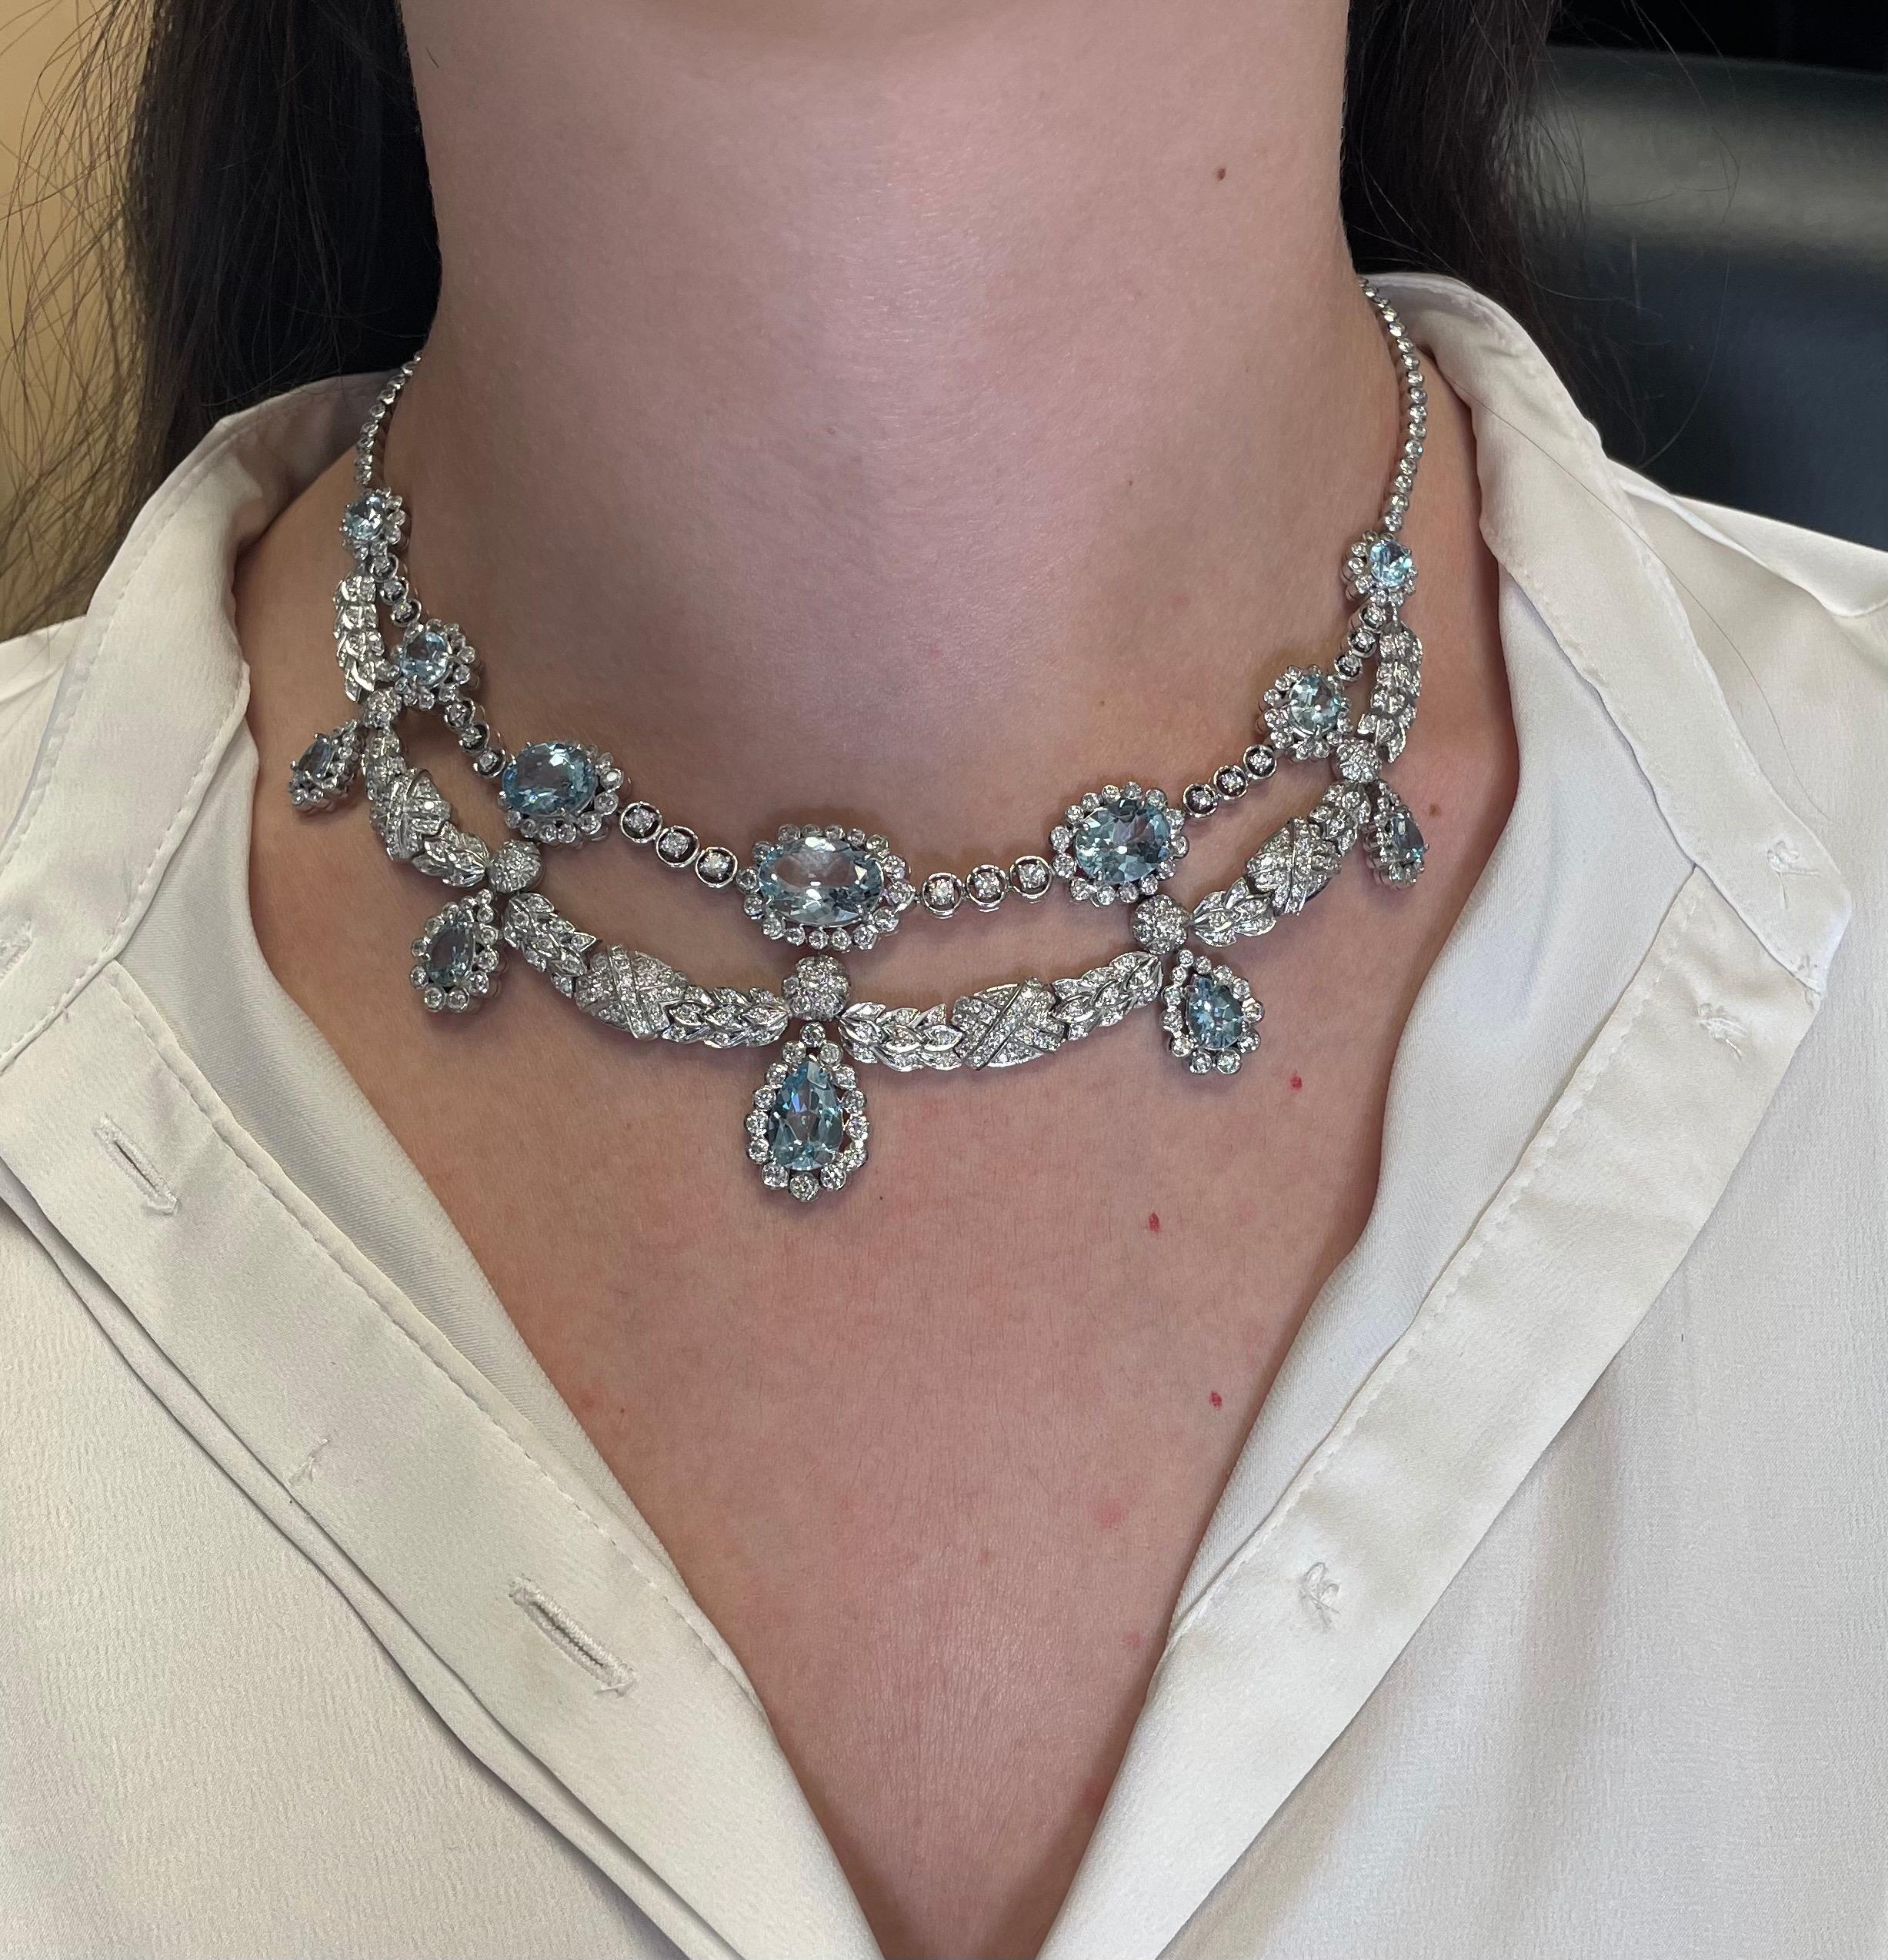 Statement Edwardian inspired aquamarine and diamond necklace.
19.35 carats of oval and pear shape aquamarines beryl. 10.48 carats of round diamonds, approximately H/I color and SI clarity. 18-karat white gold. 
Accommodated with an up to date